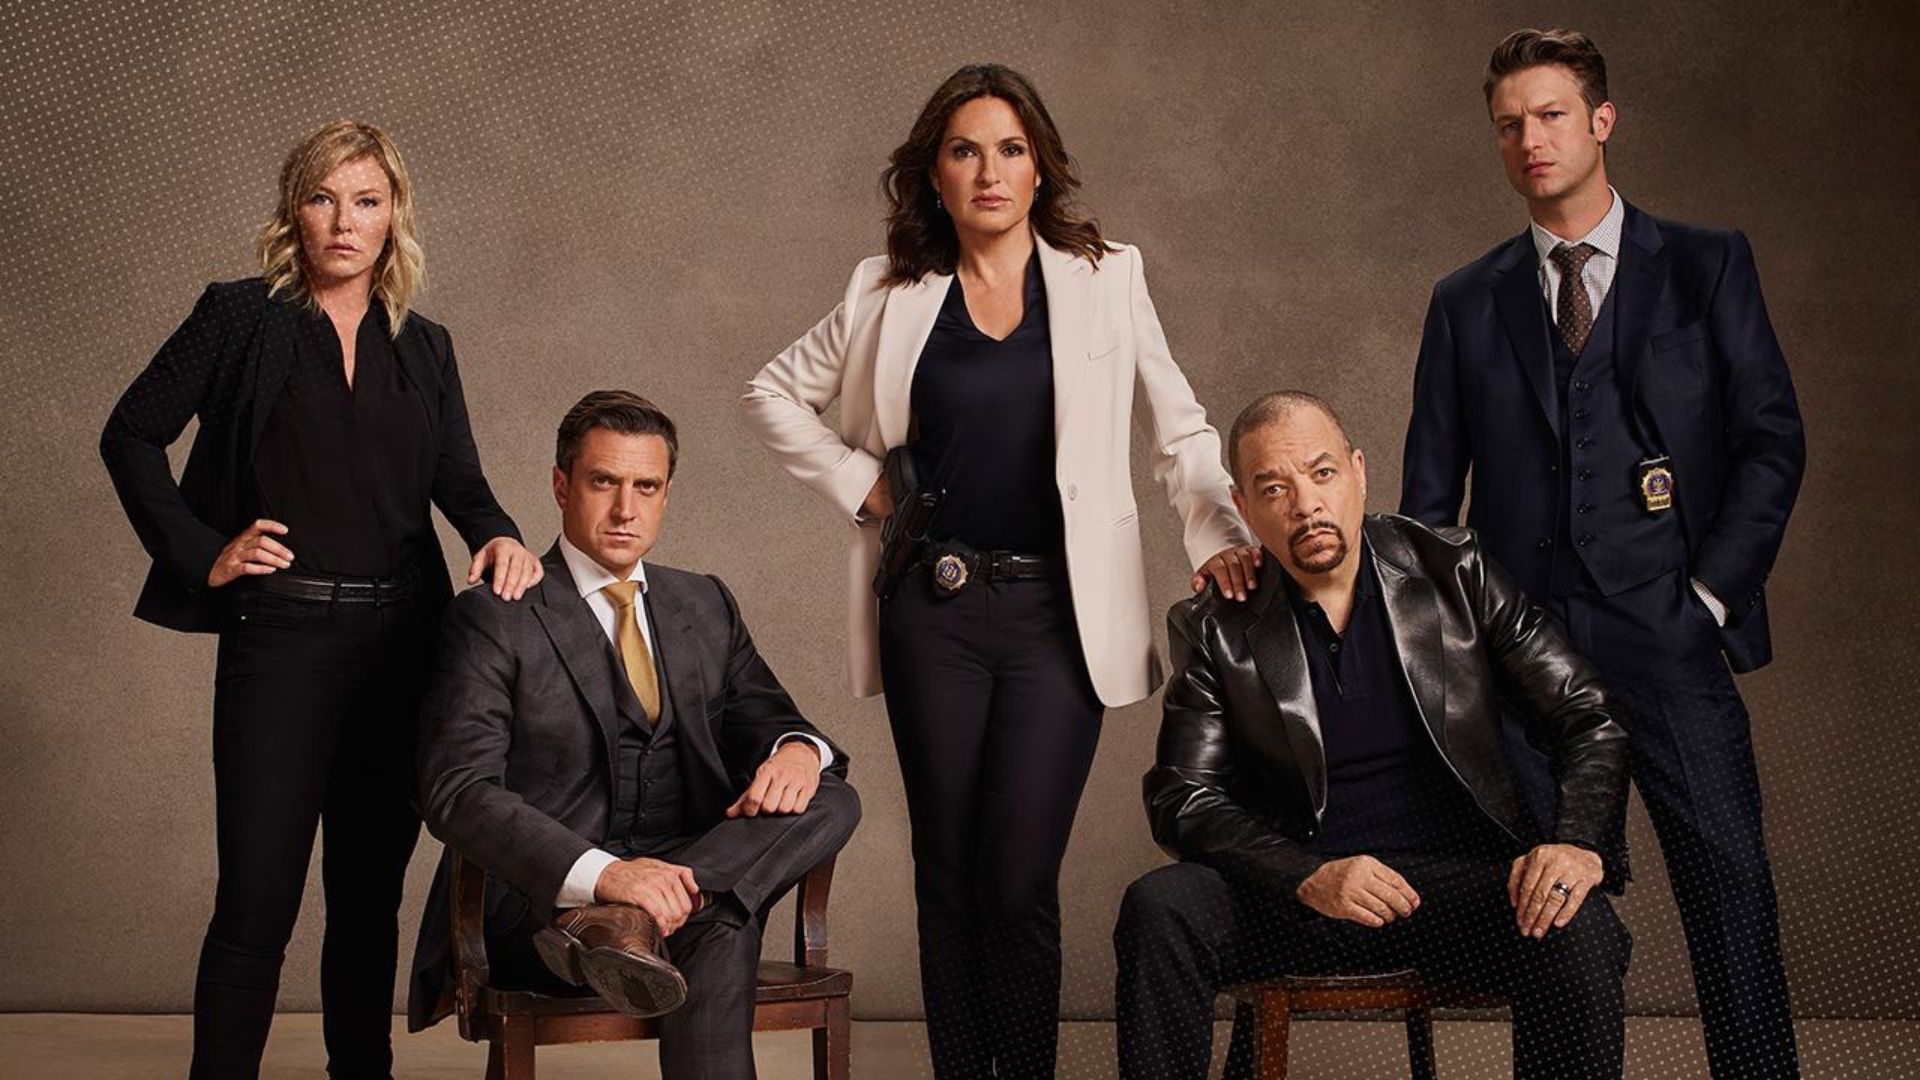 Law and Order Season 23: Renewal status, release date estimate, synopsis, expected cast members and everything we know so far